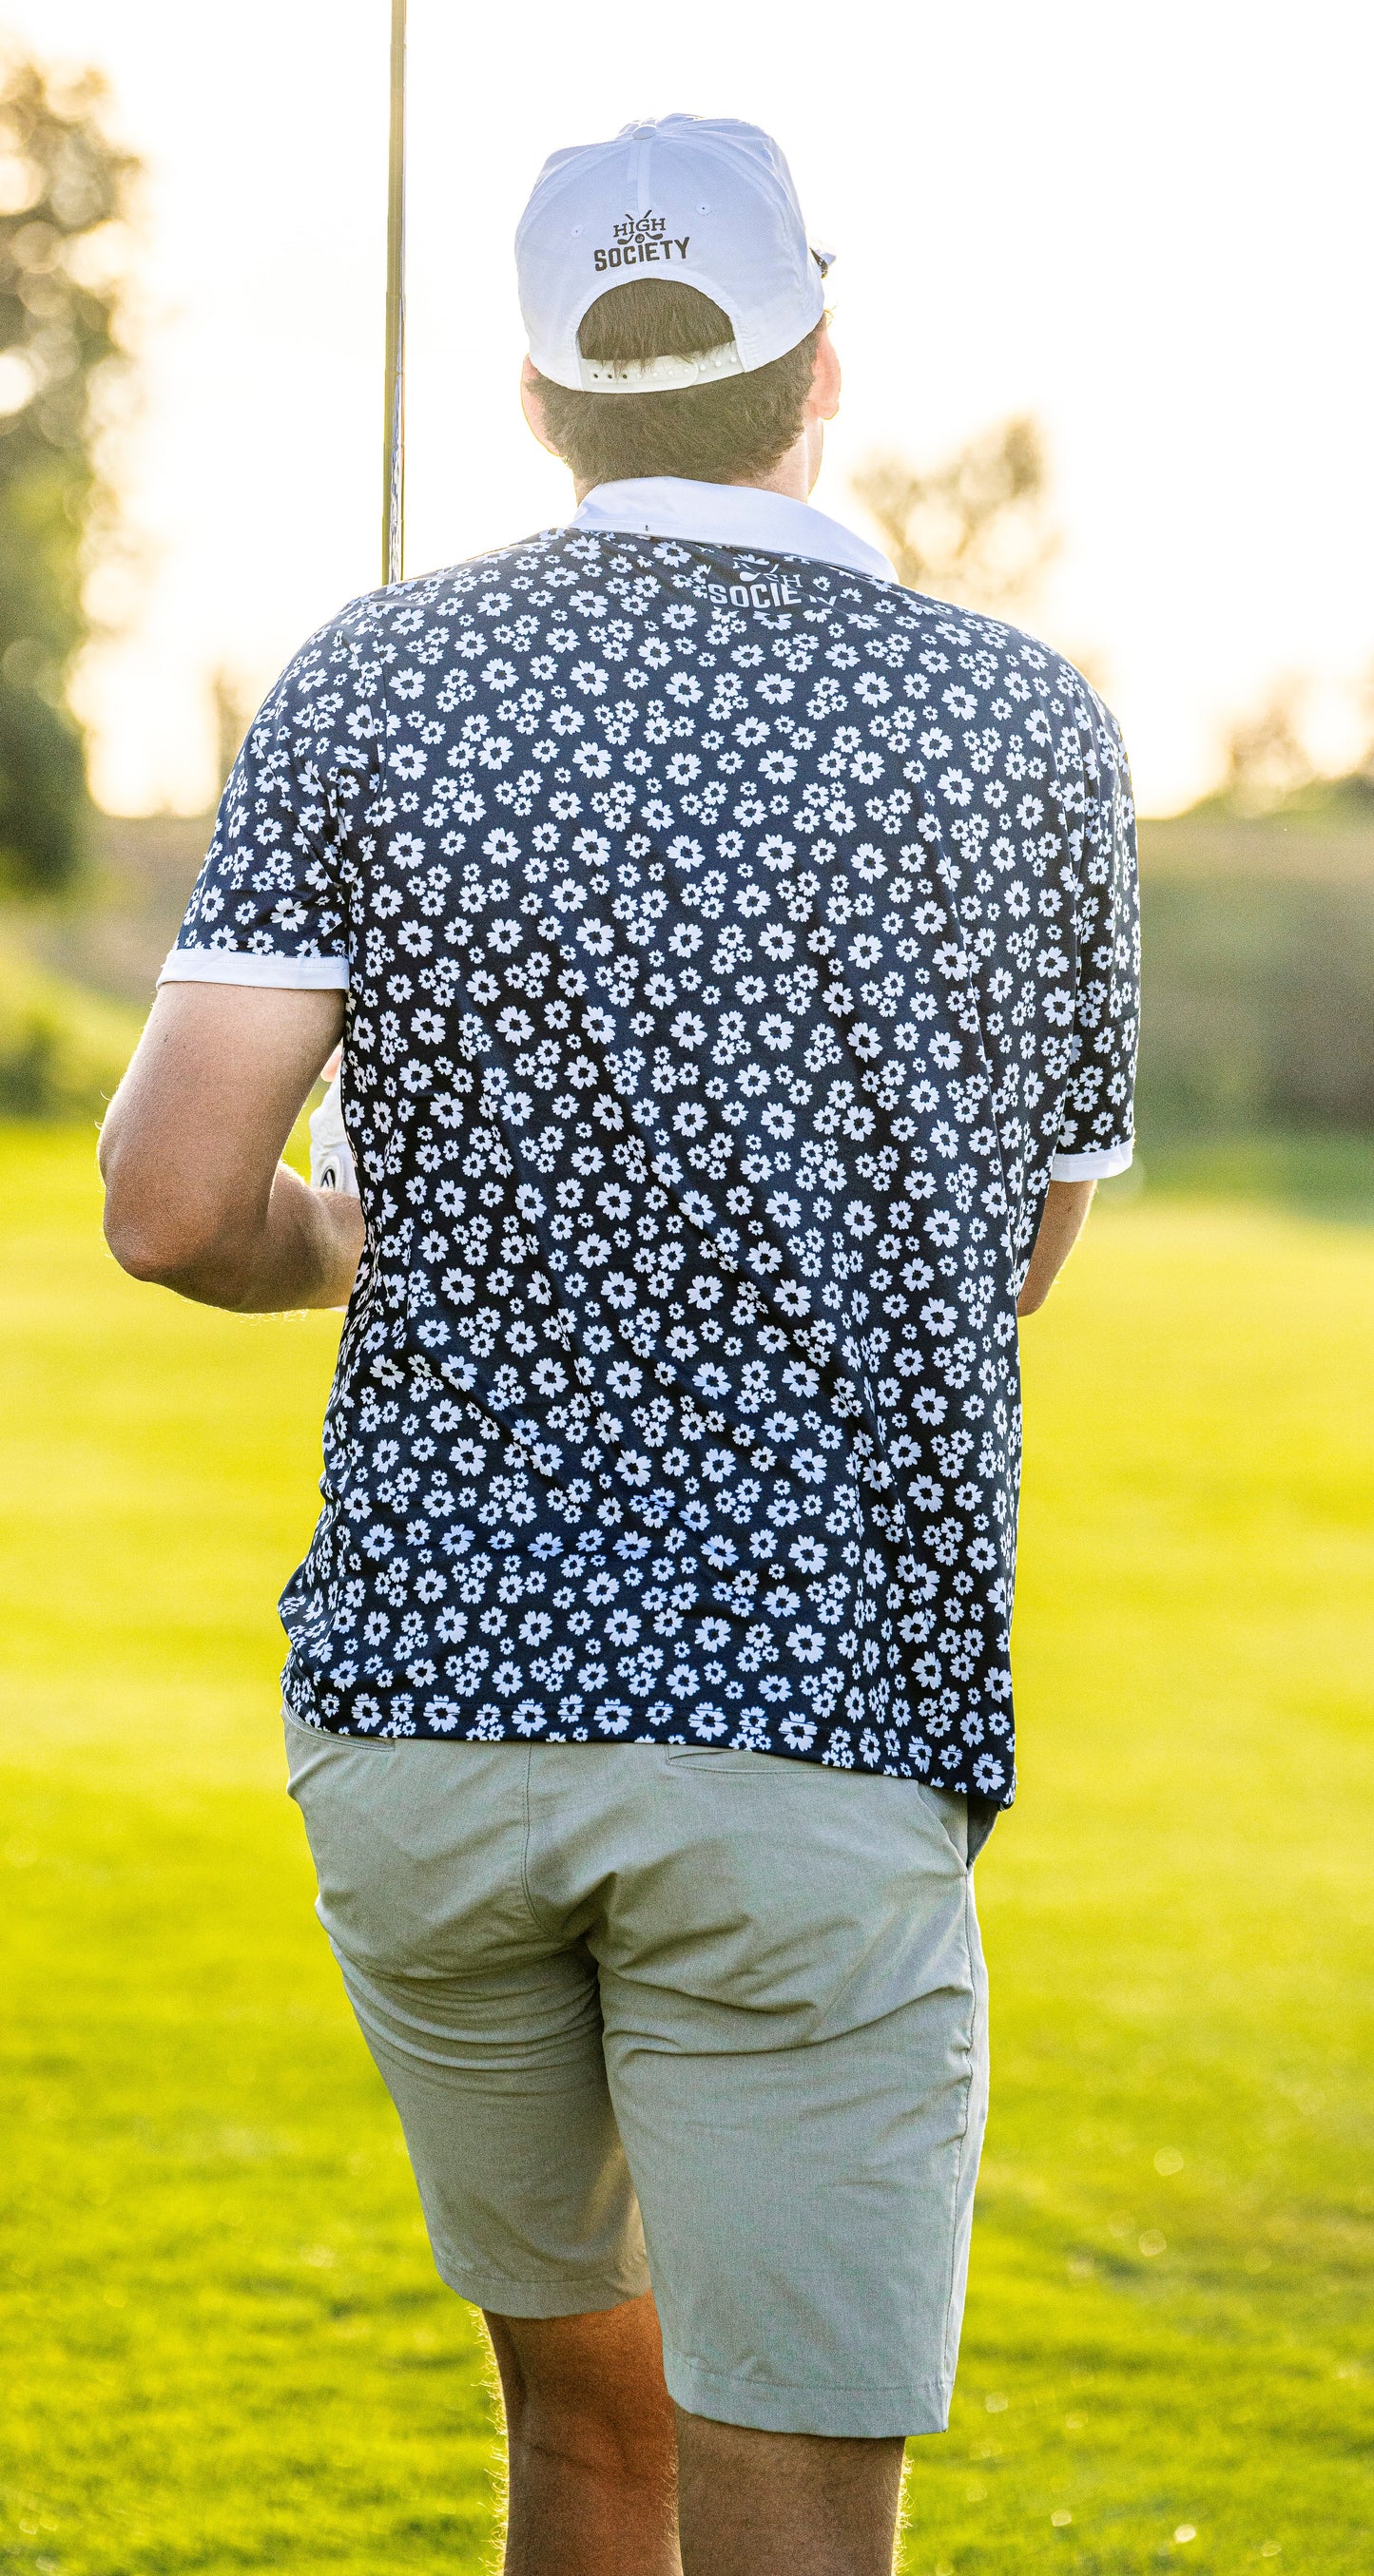 Navy Floral Performance Polo